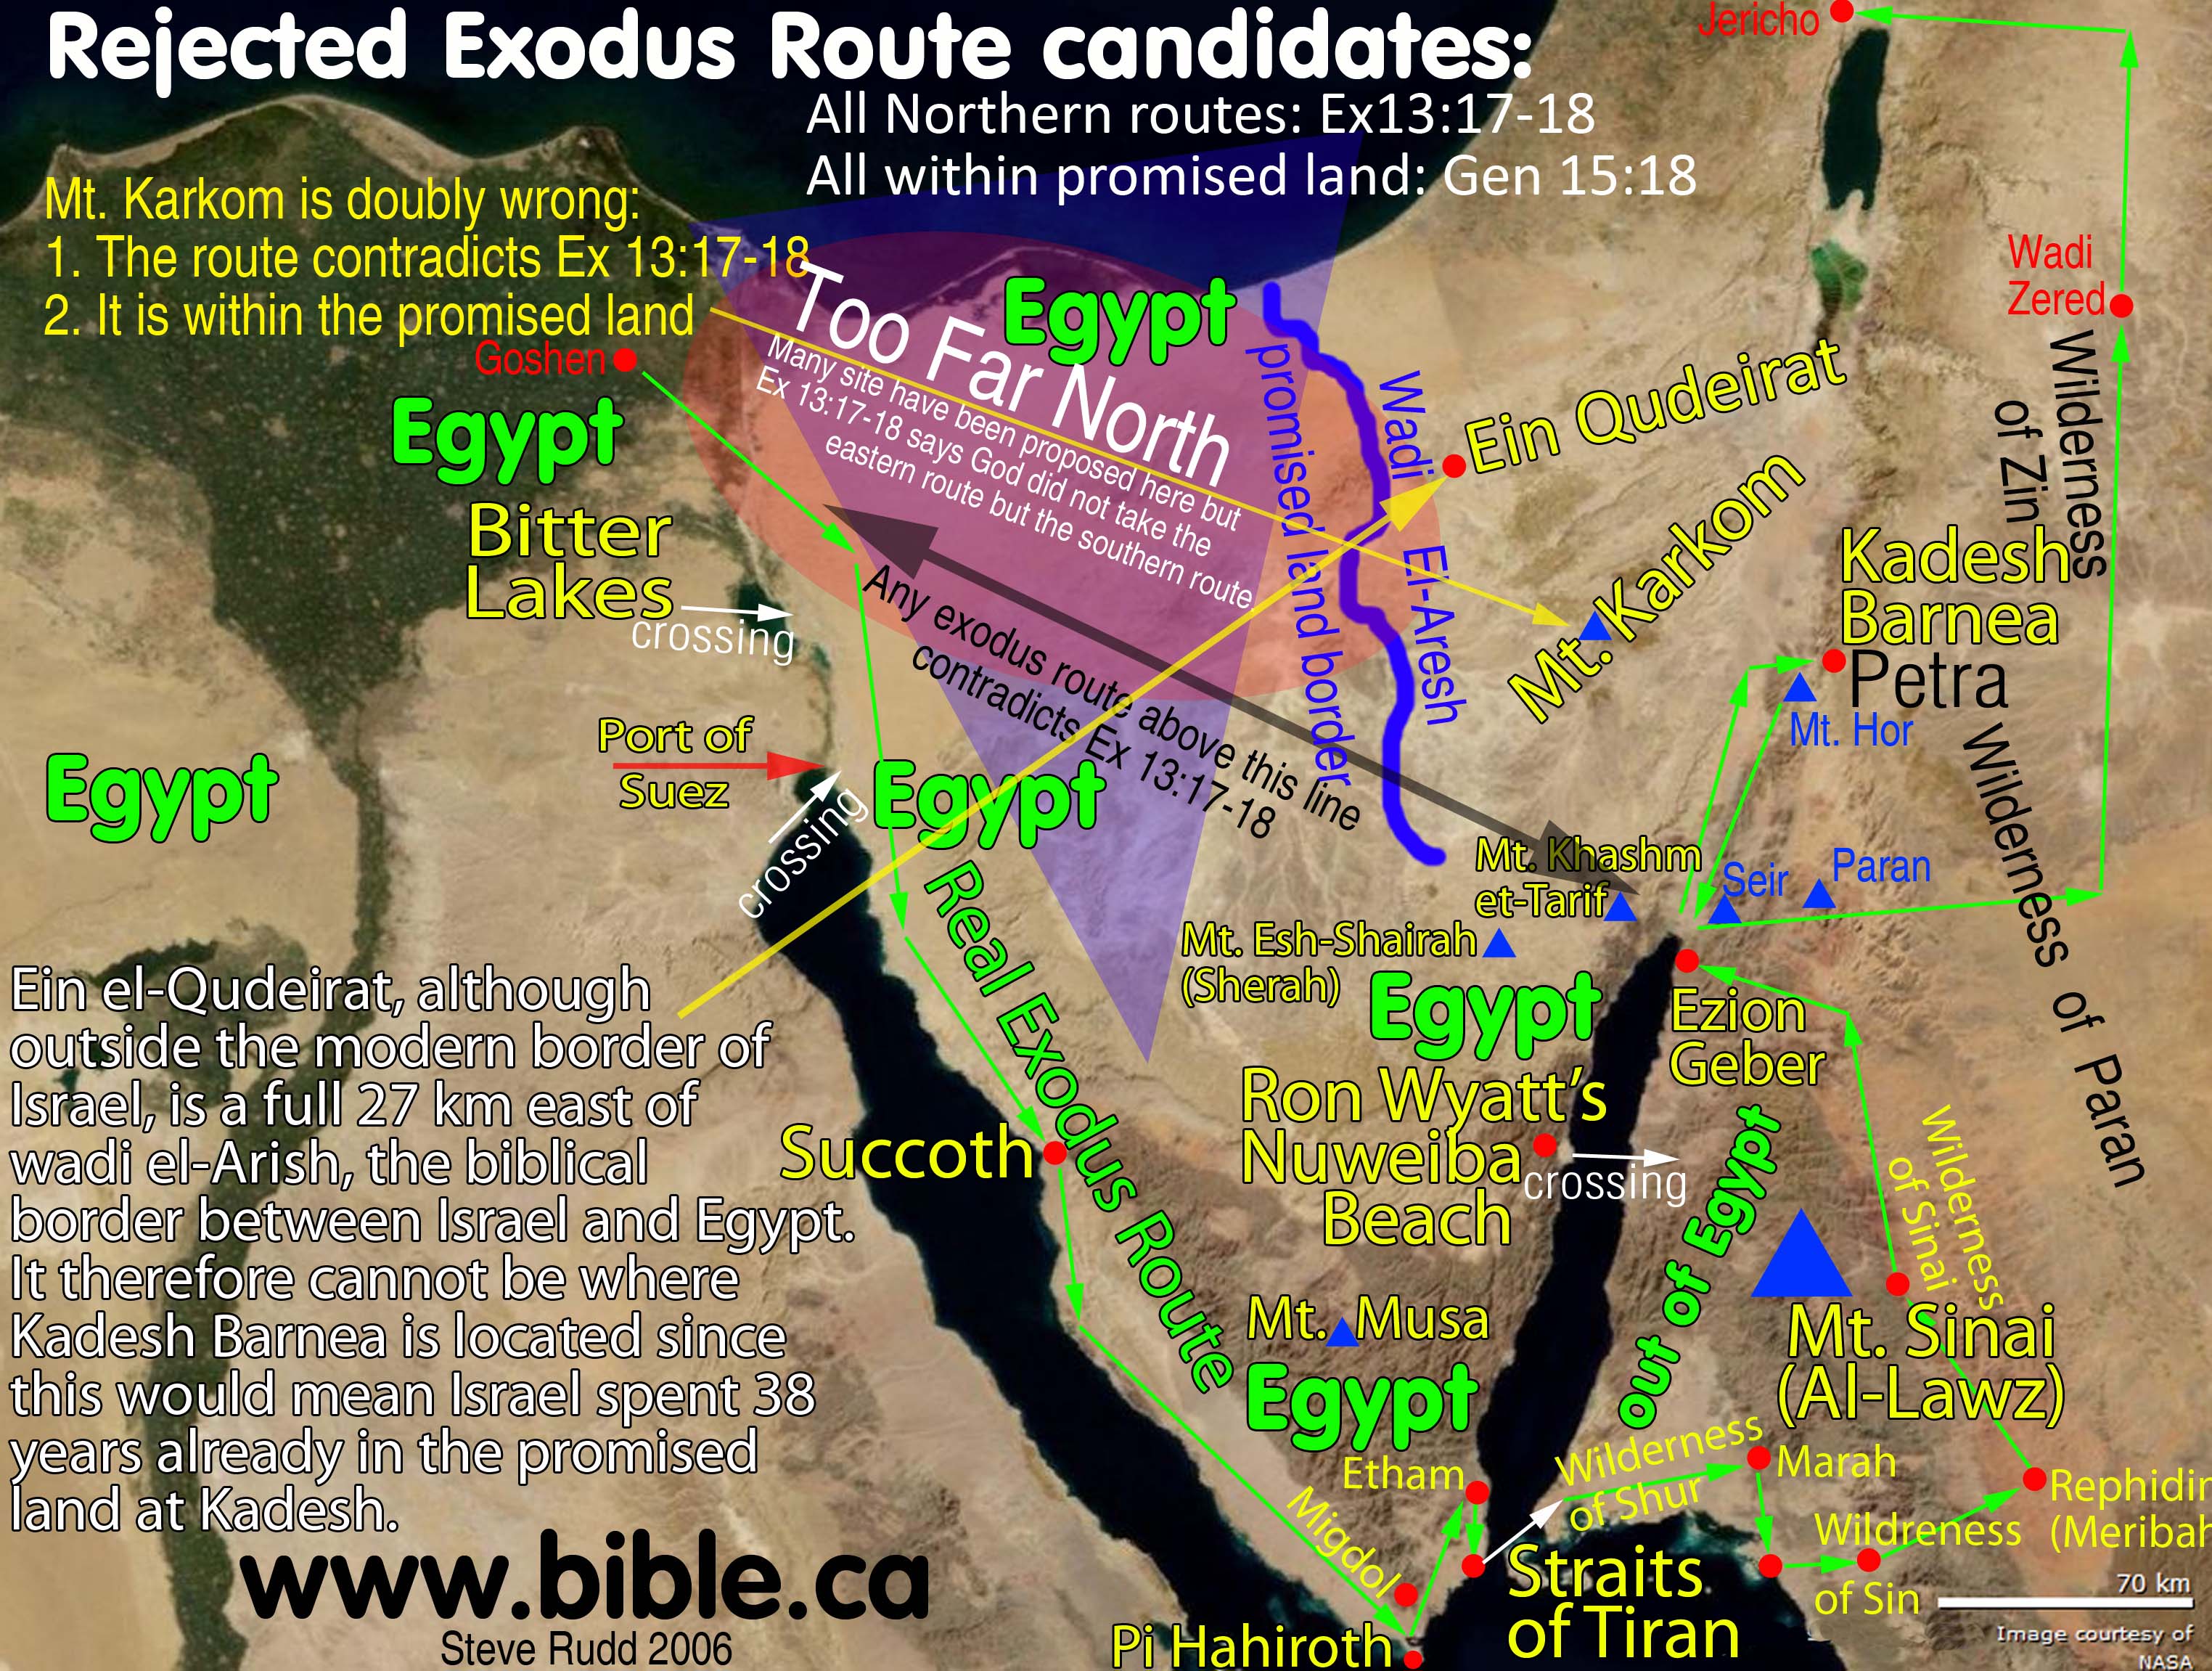 Various exodus route choices rejected and exposed.